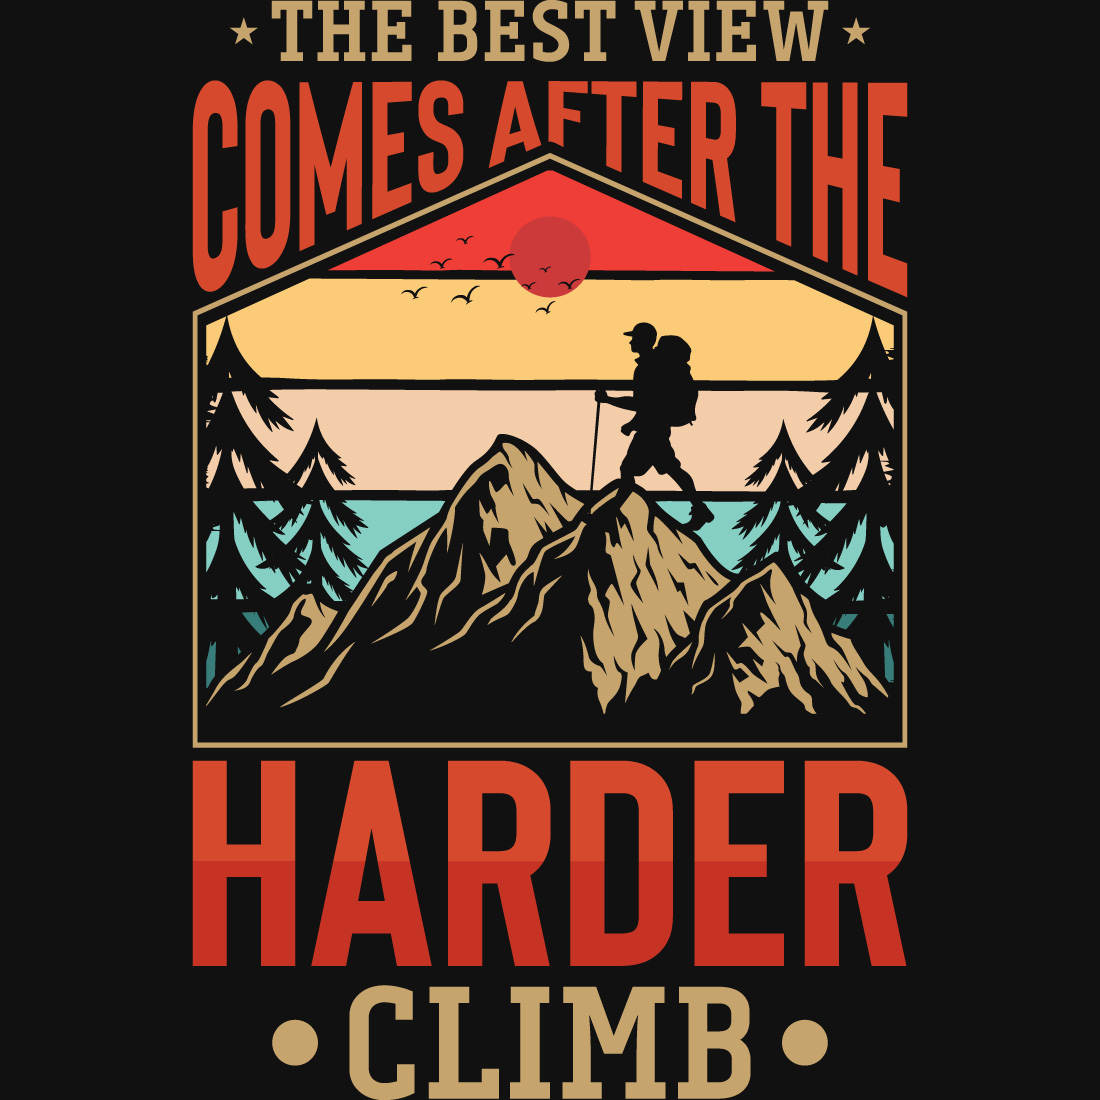 Camping T-Shirt Design cover image.